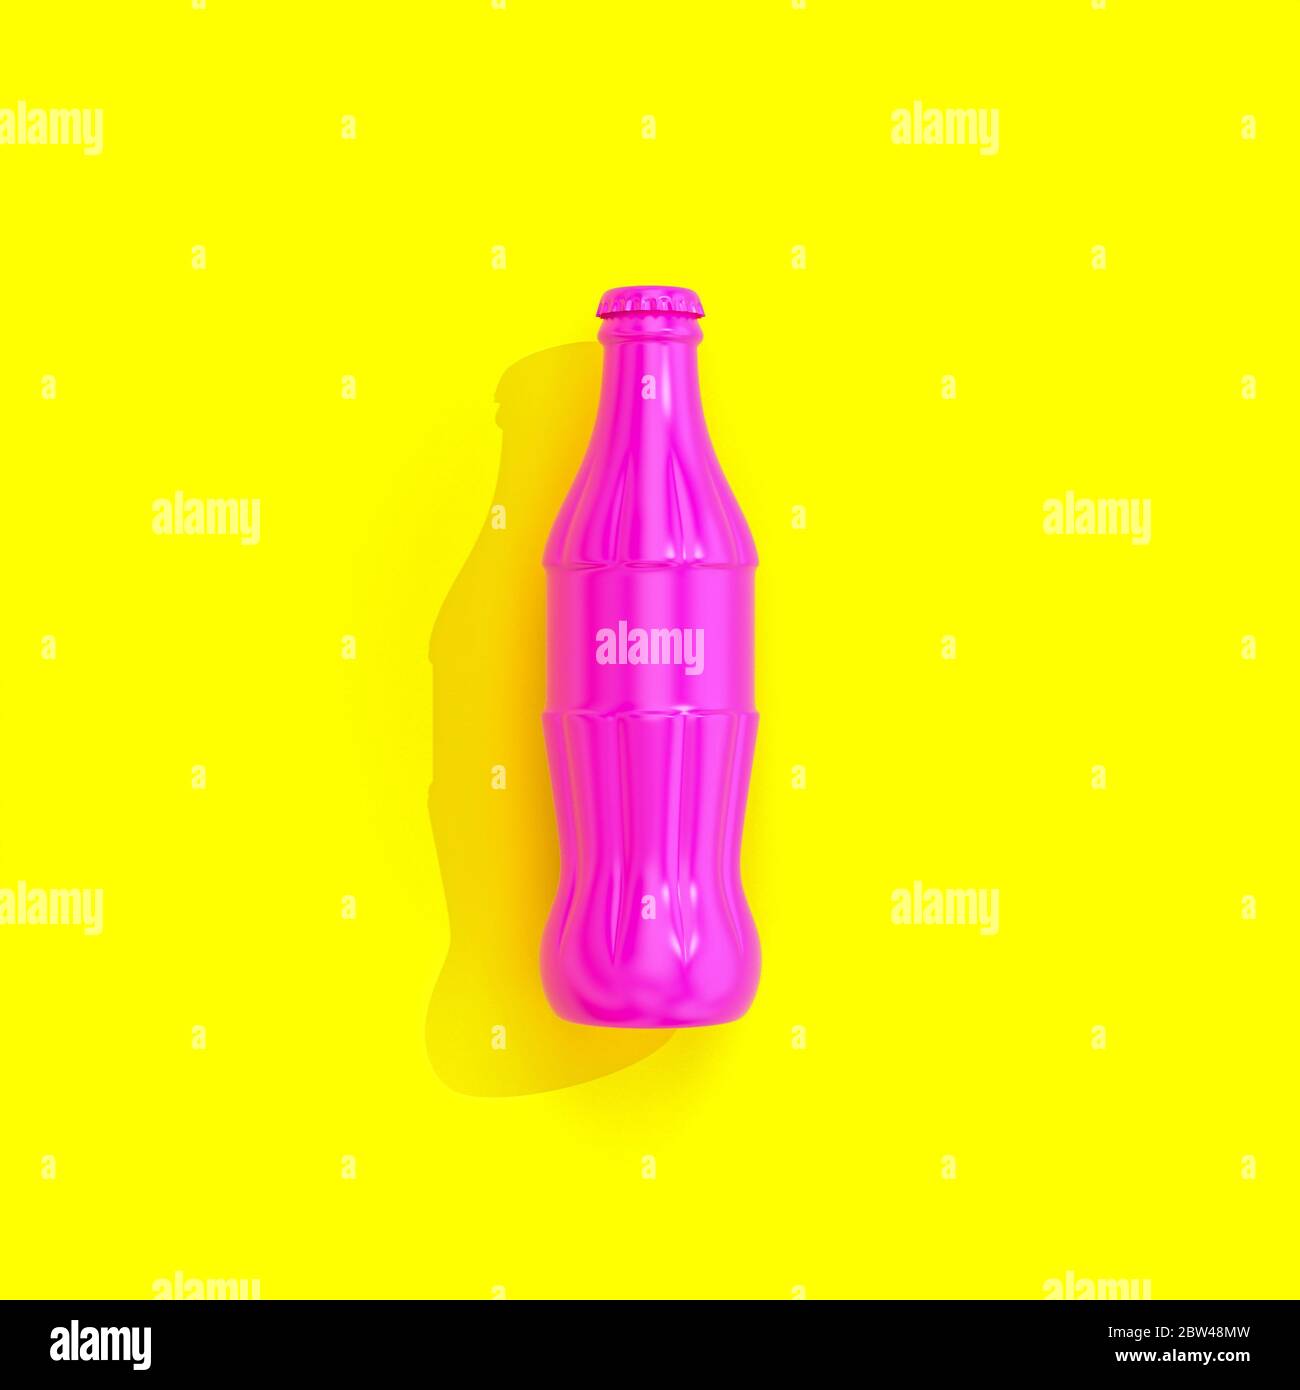 fuchsia bottle on yellow background in flat lay style. 3d render. nobody around. square format. Stock Photo